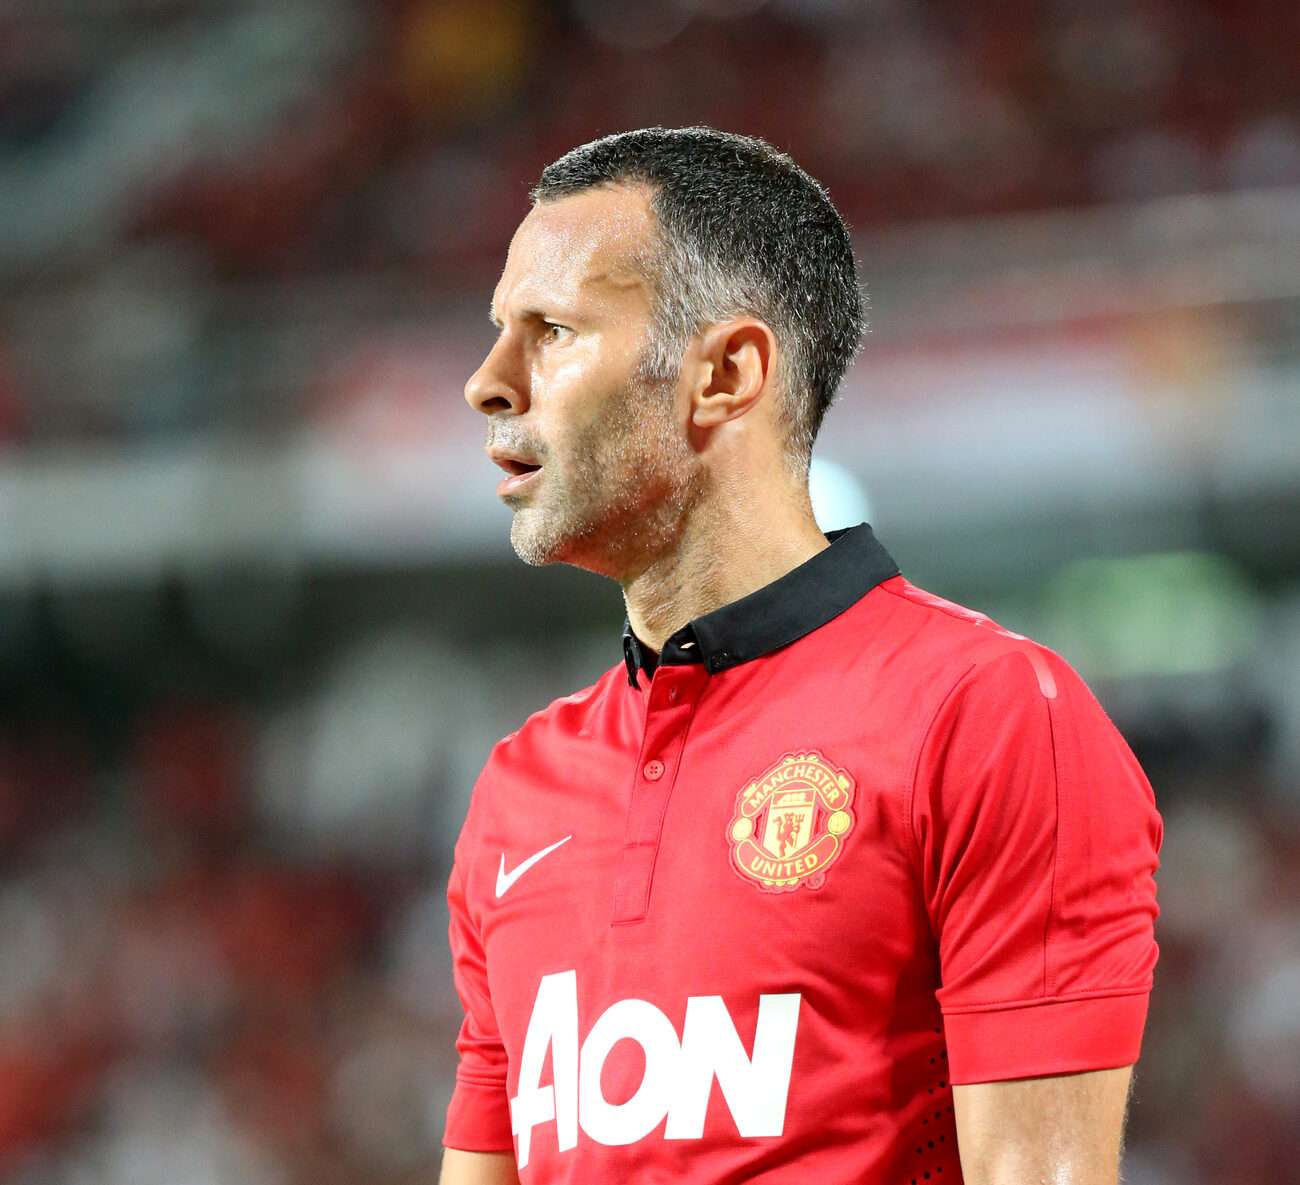 Ryan Giggs record: add your title number 13  Premier